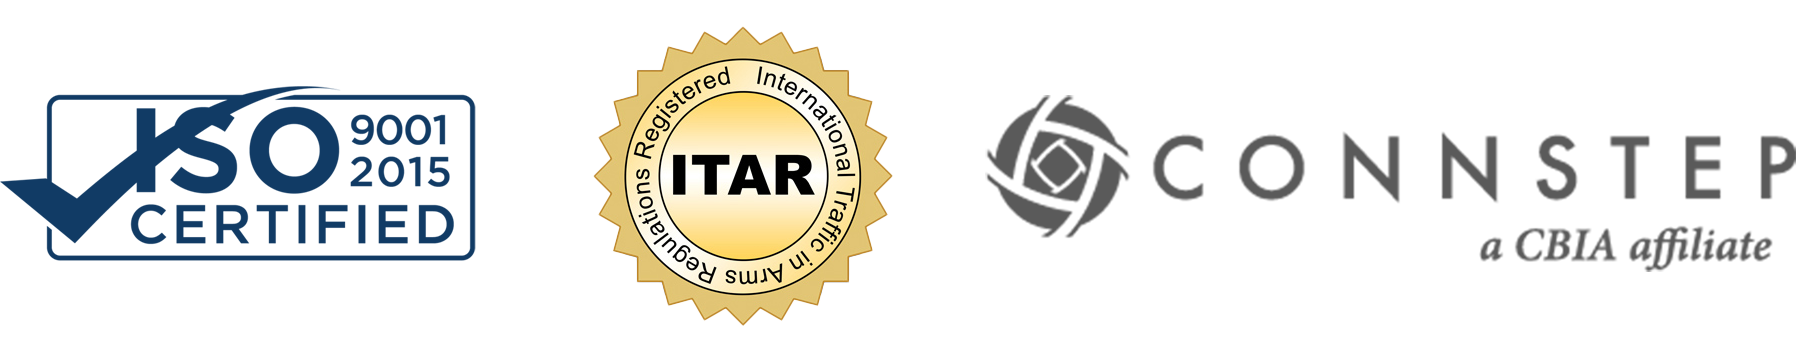 ISO Certified and ITAR Certified Connstep logo 